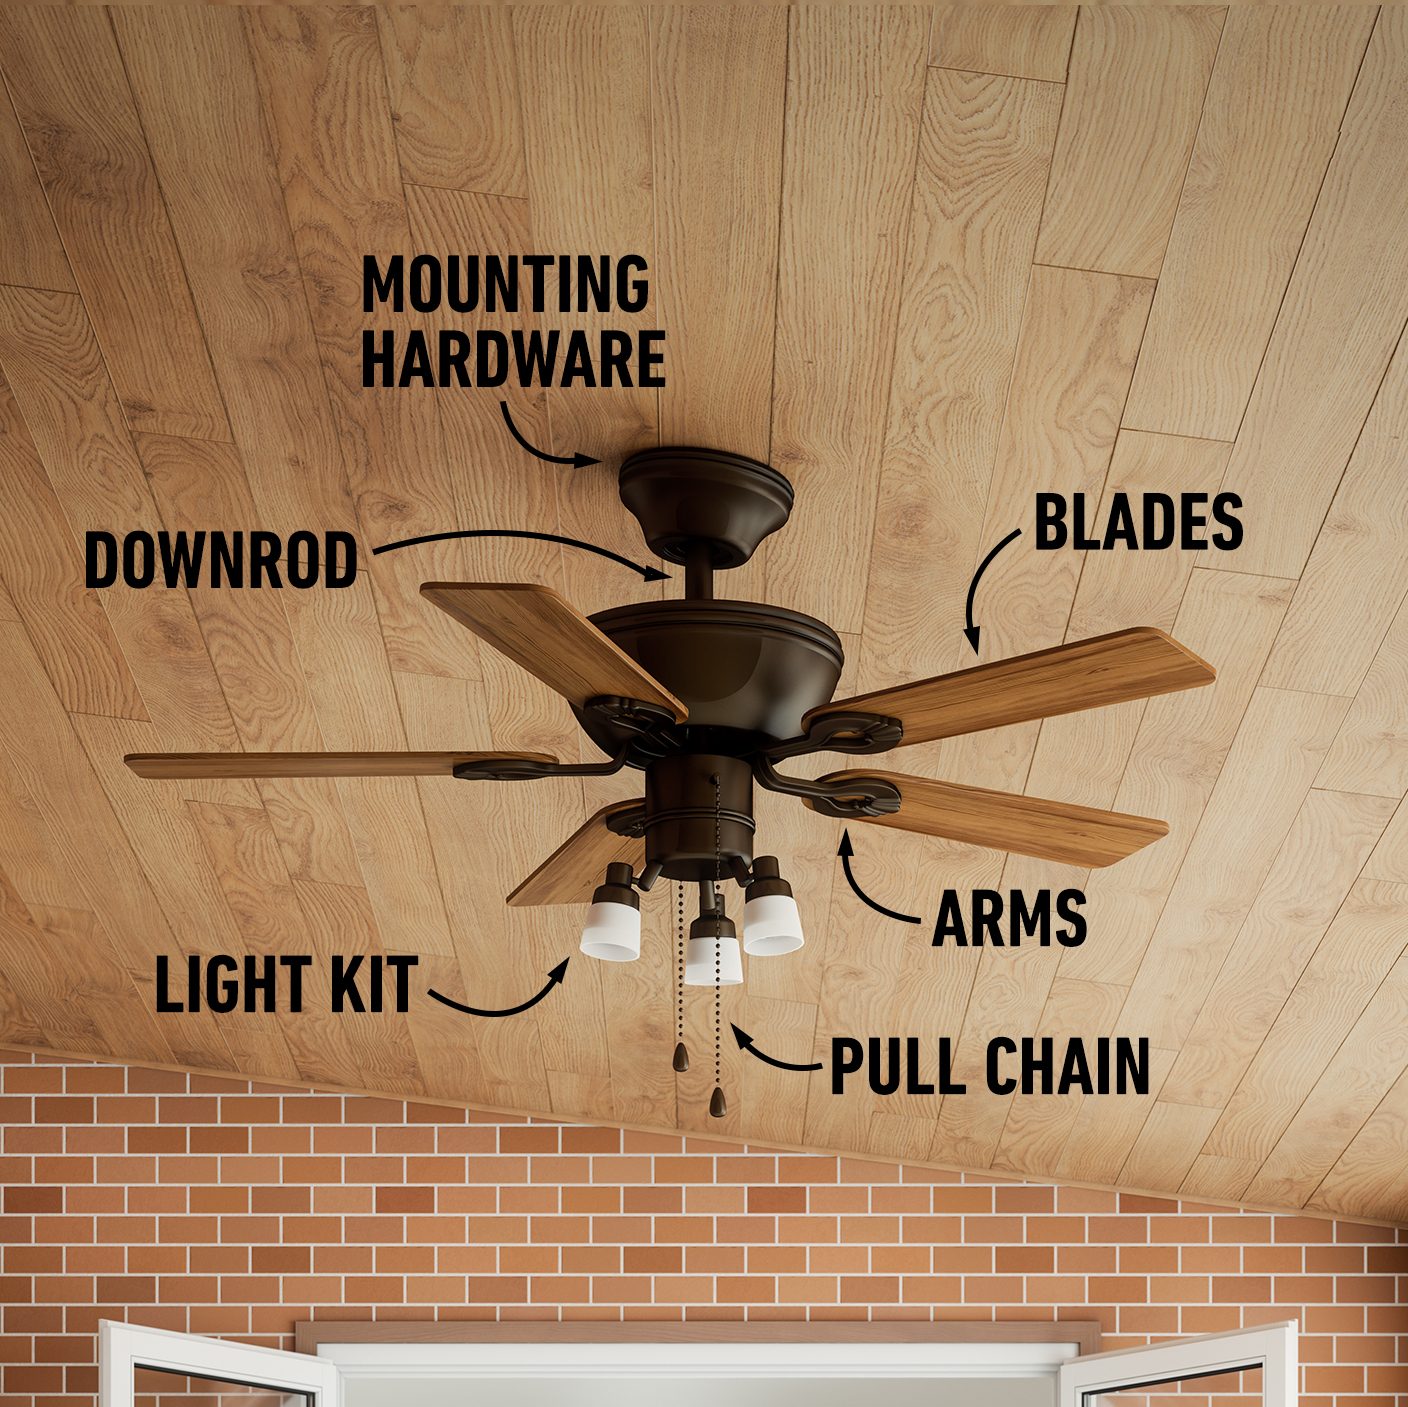 Ceiling Fan with labeled parts